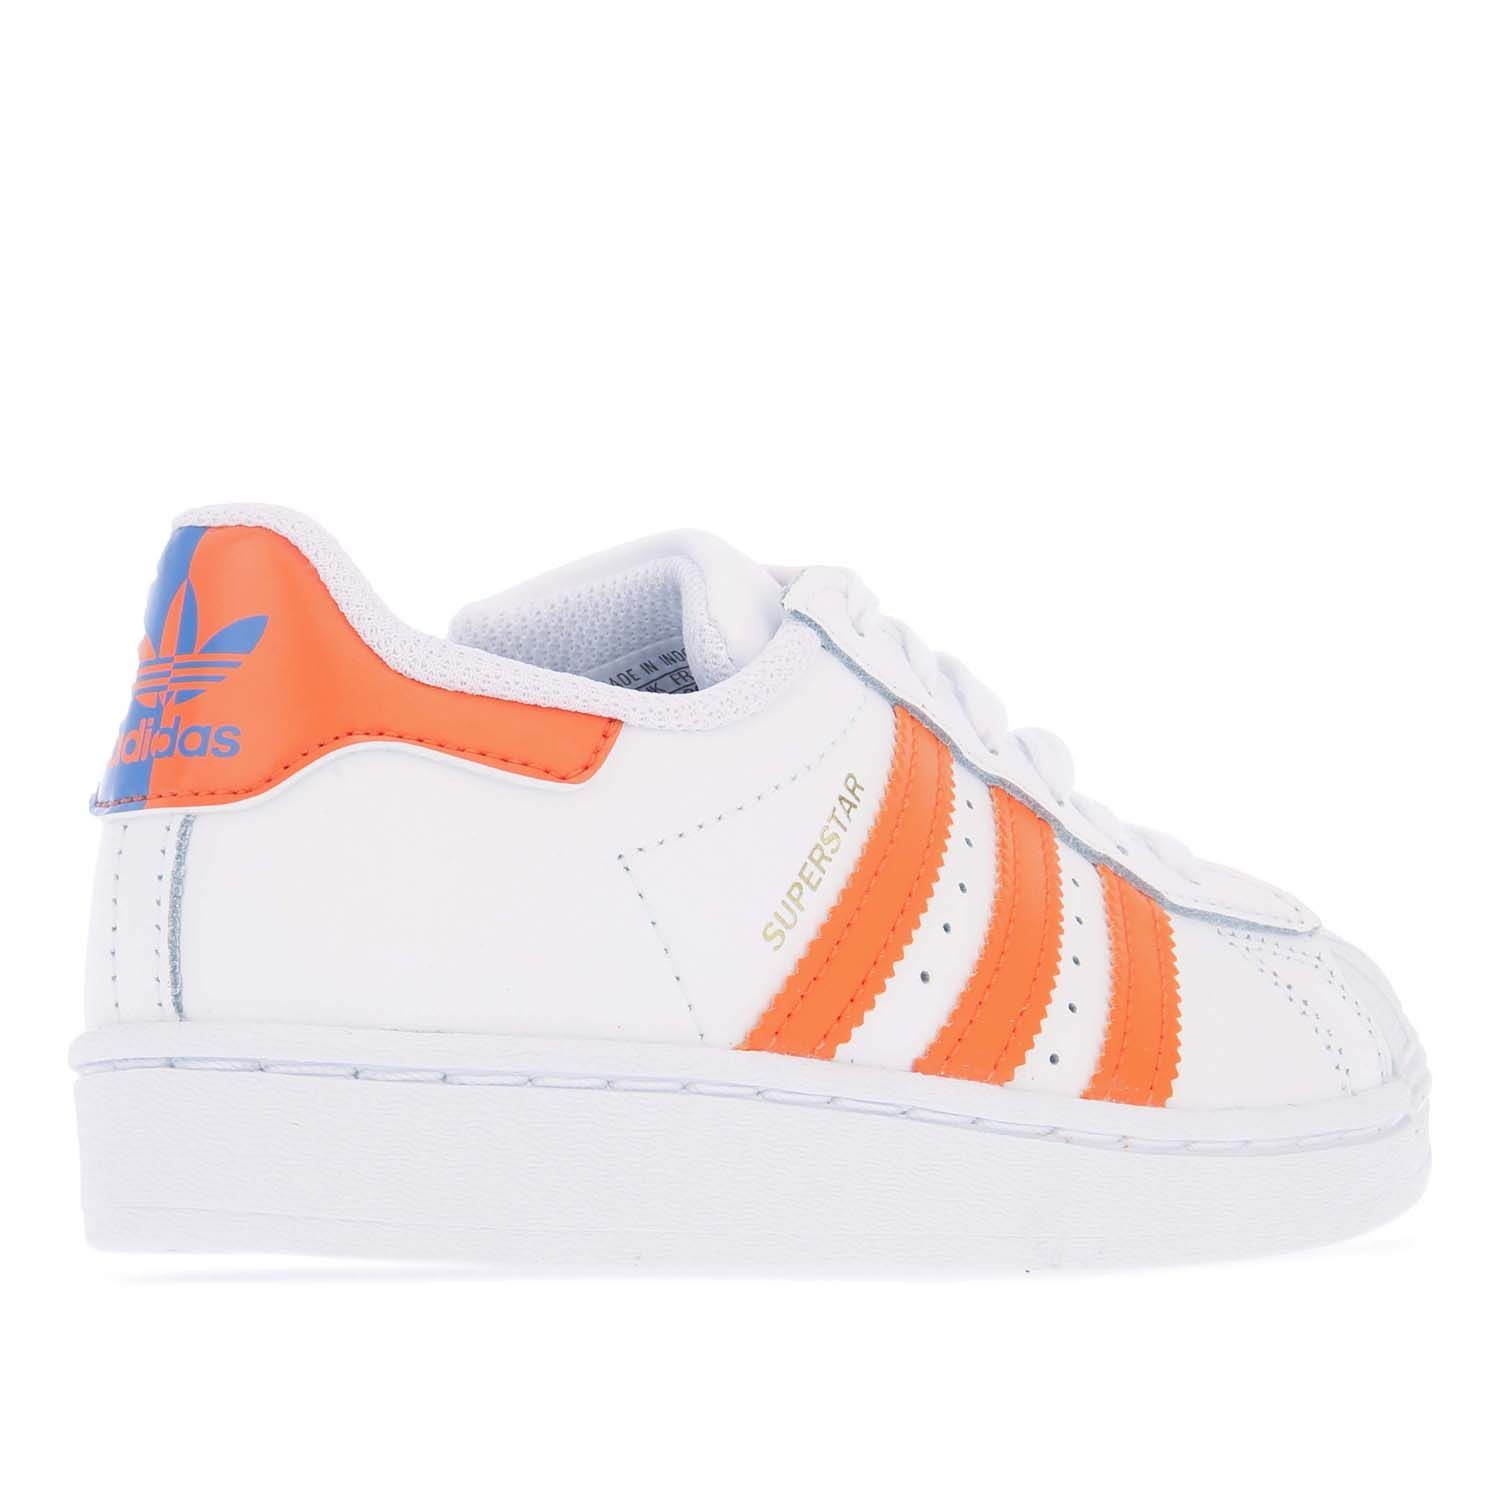 Childrens adidas Originals Superstar Trainers in white blue.- Leather upper.- Lace closure.- Regular fit.- Side metallic stripes.- Signature 3-Stripes to the sidewalls.- Trefoil logos to the tongue and heel. - Grippy rubber sole. - Leather upper  Textile lining  Synthetic sole. - Ref.: FZ0650C